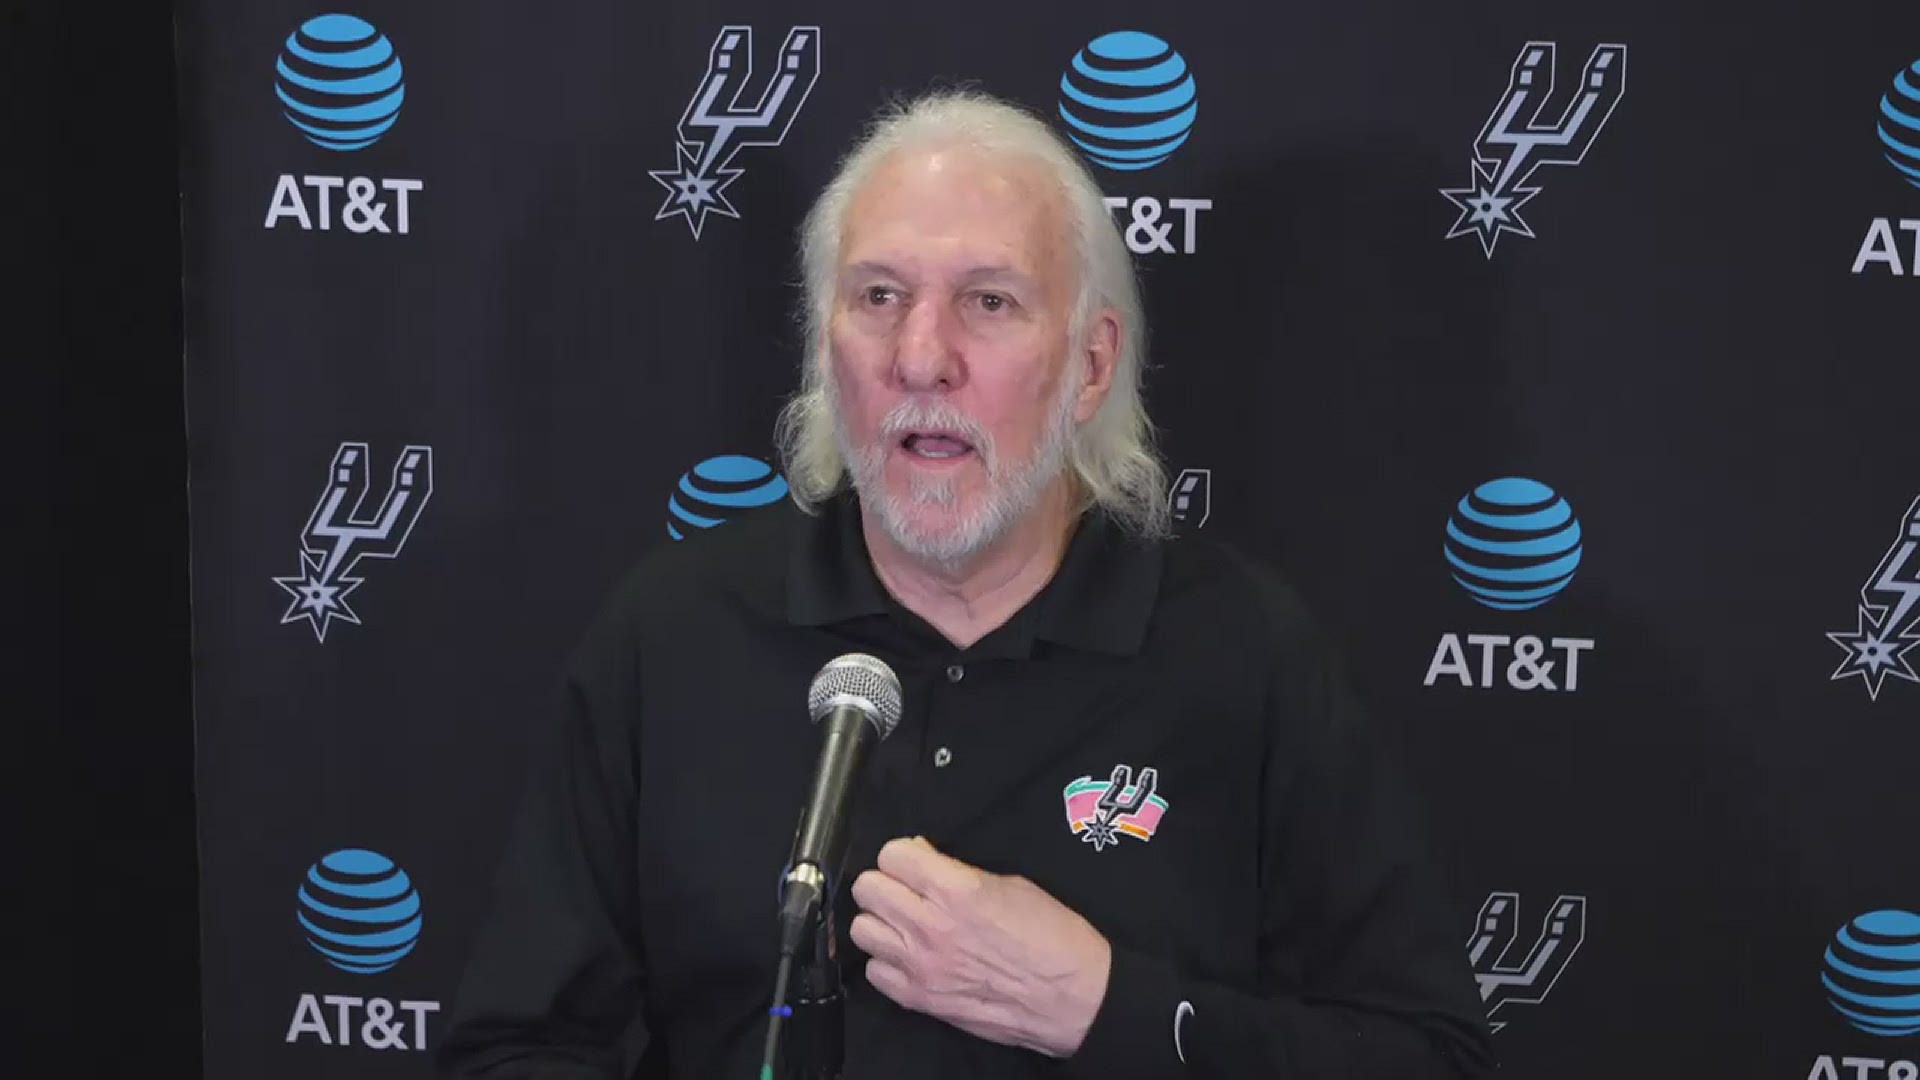 San Antonio Spurs head coach Gregg Popovich says COVID has made it difficult for his team to gather any momentum this season.